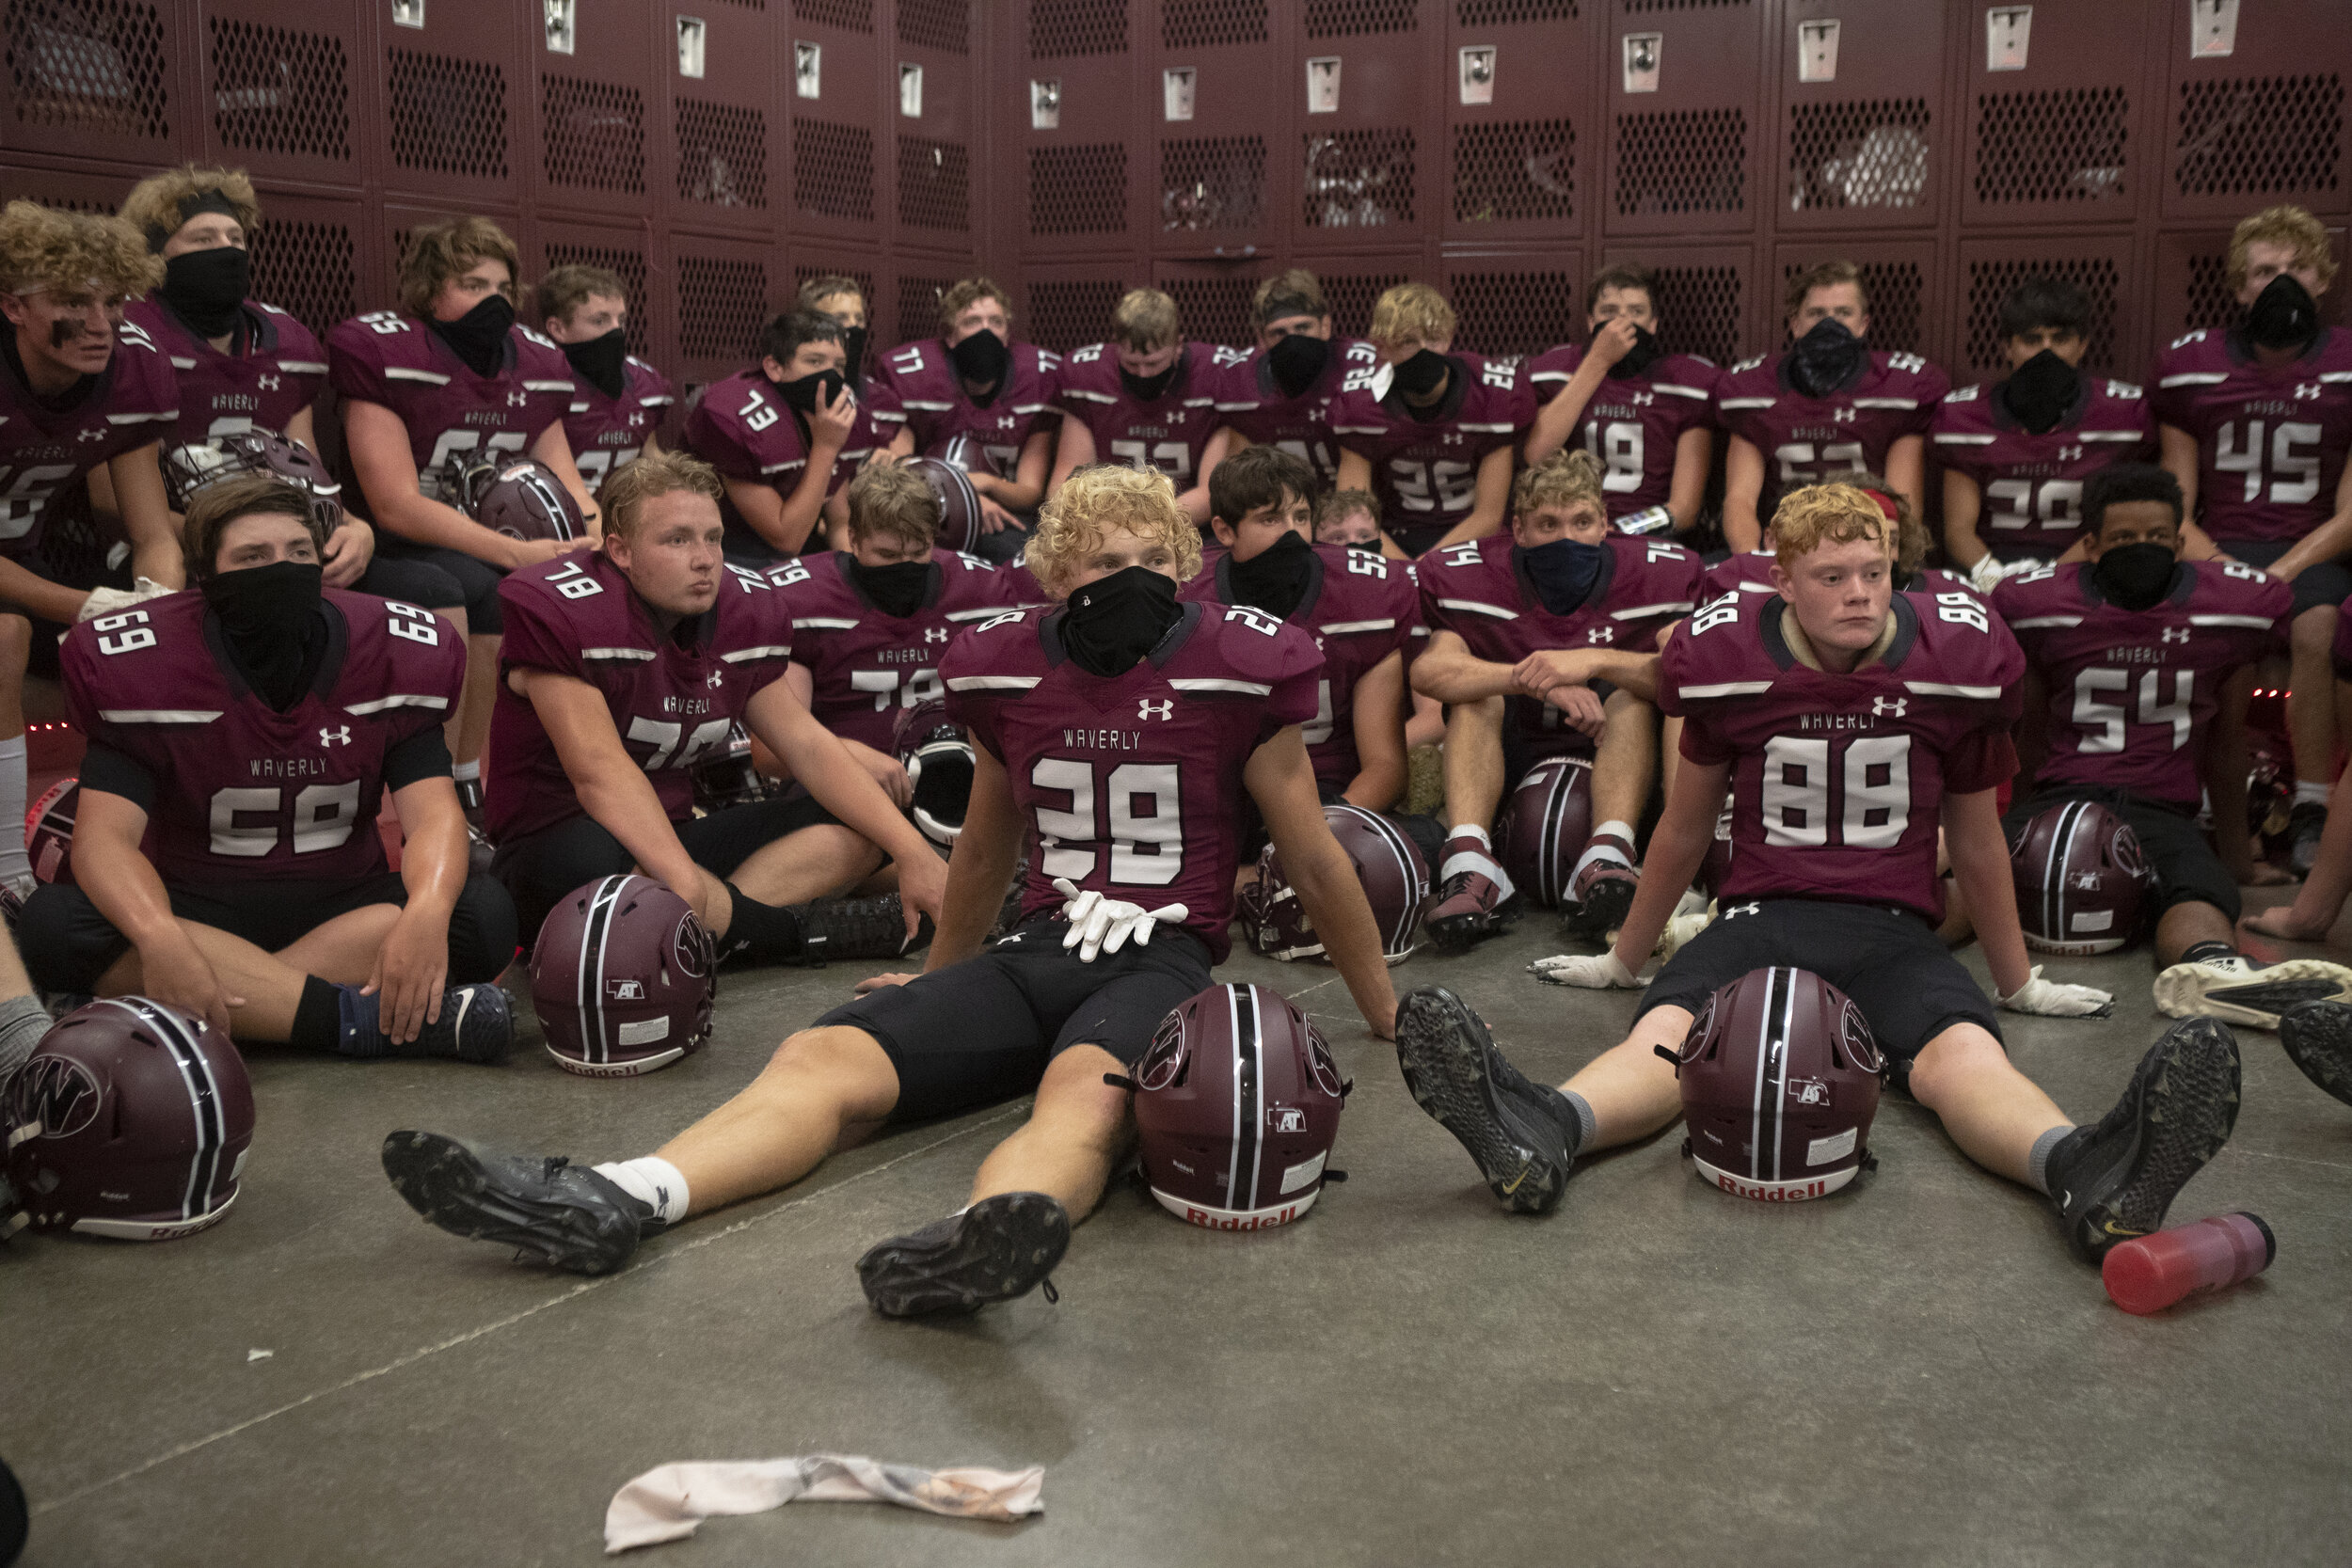  Waverly waits for the game to start in the locker room at Waverly High School during the matchup between No.1 Omaha Skutt and No.2 Waverly on Friday, 9 04, 2020, in Waverly, Nebraska.  